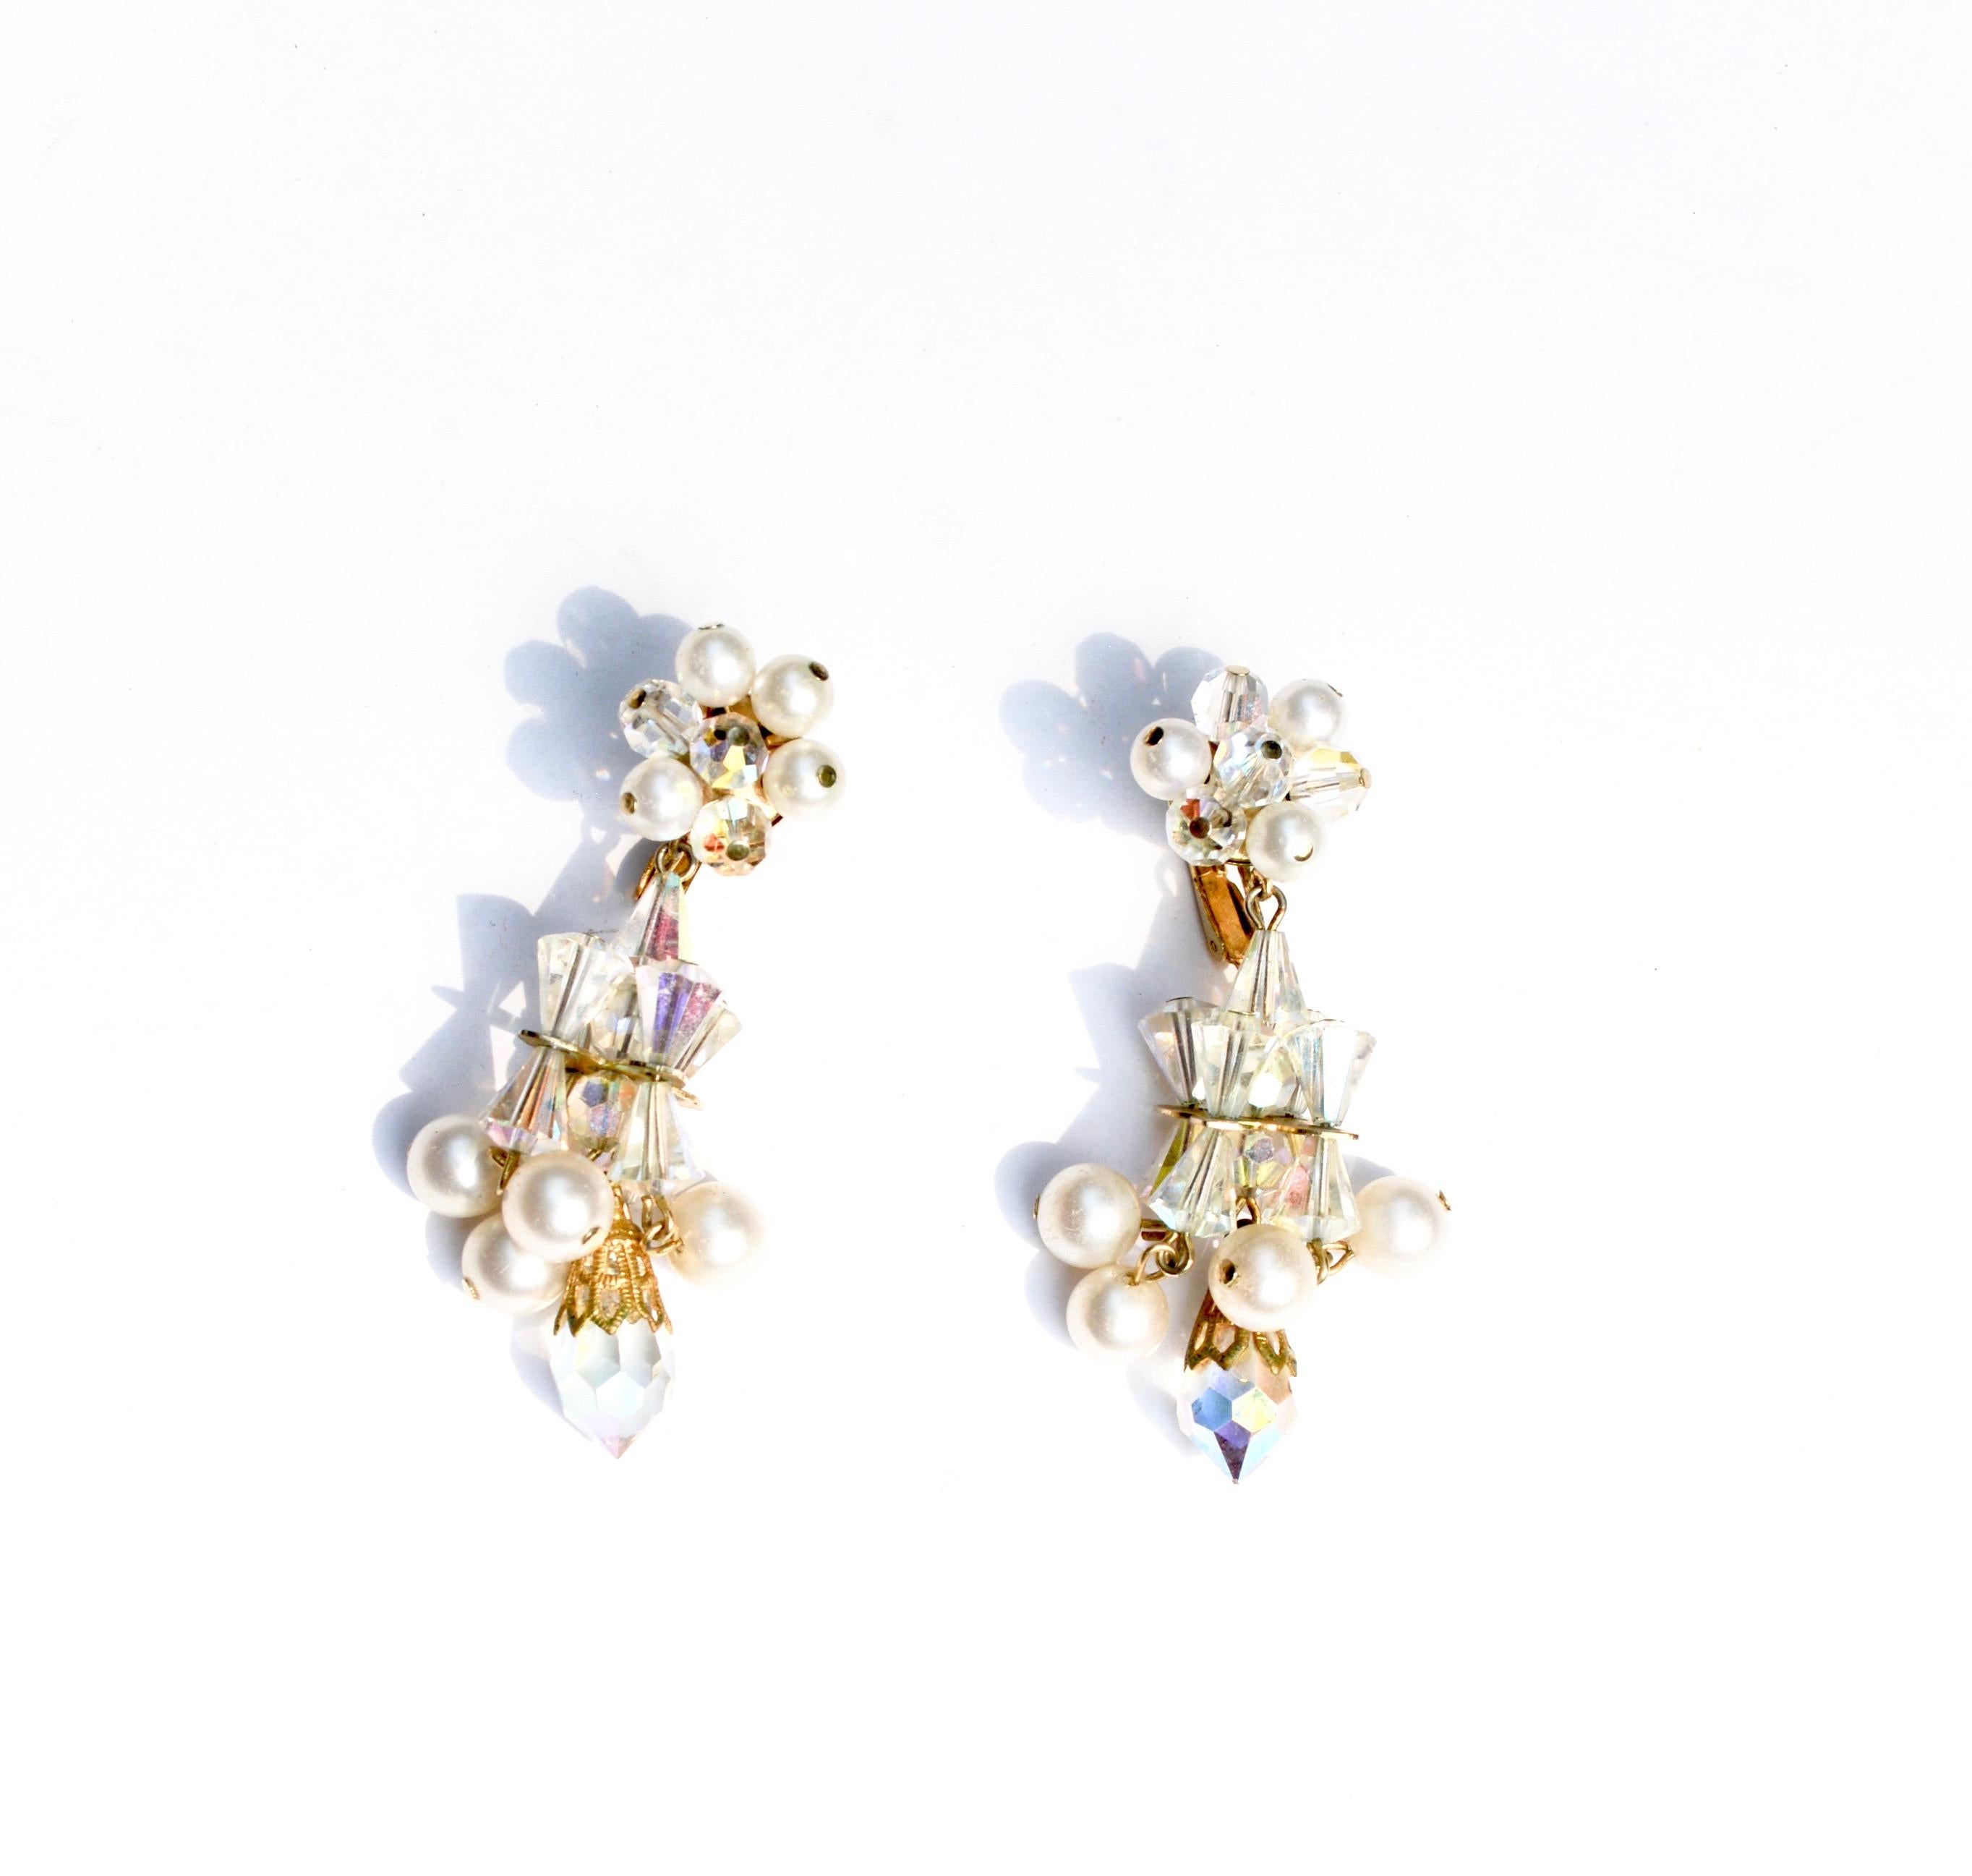 60s pearl and crystal signed Hattie Carnegie earrings. About 2